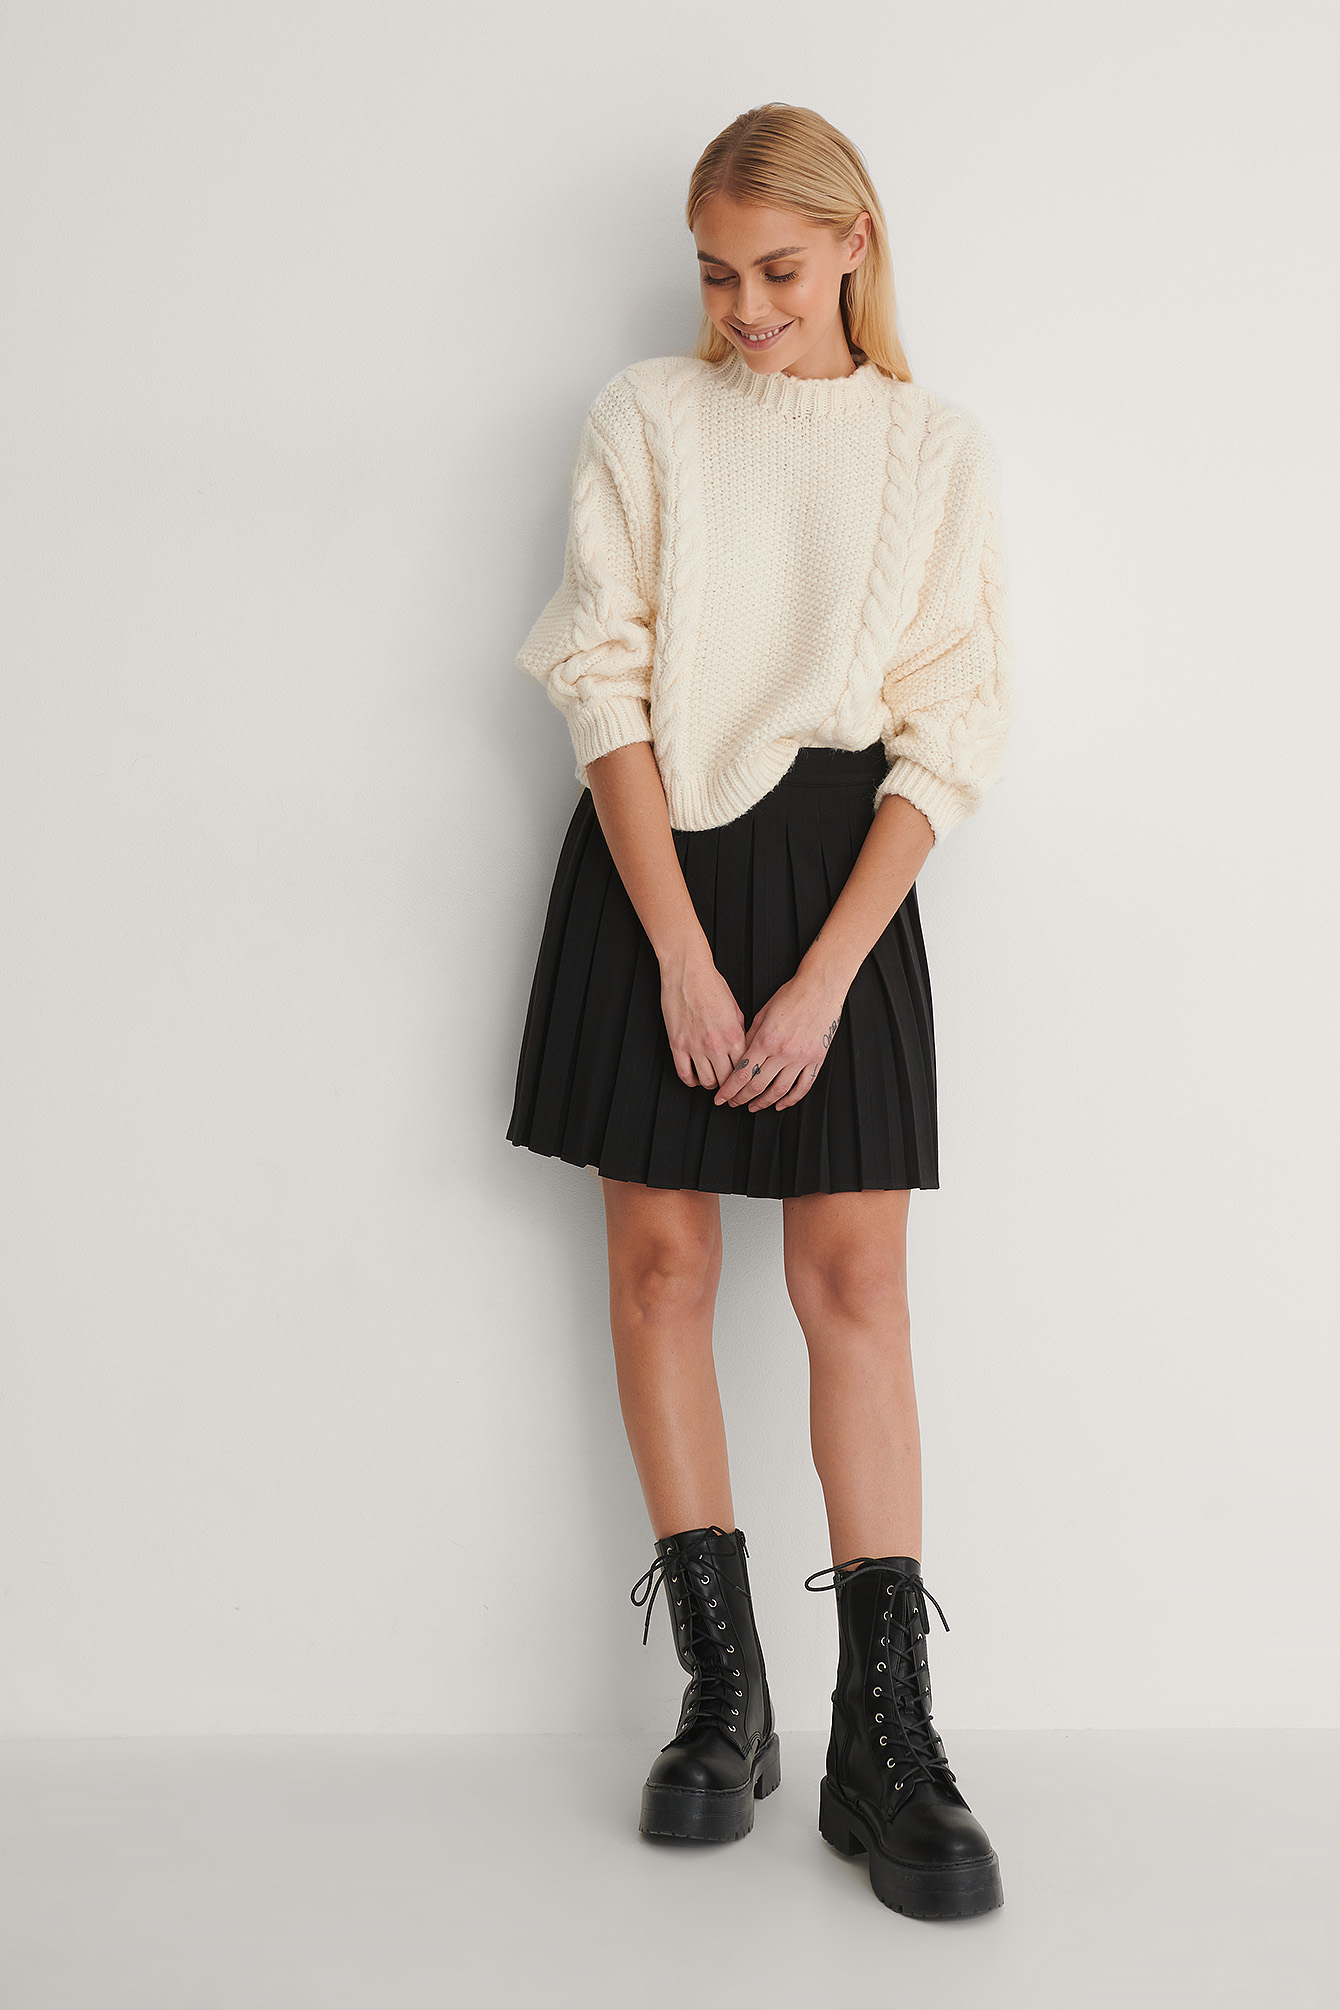 Pleated Mini Skirt Outfit.